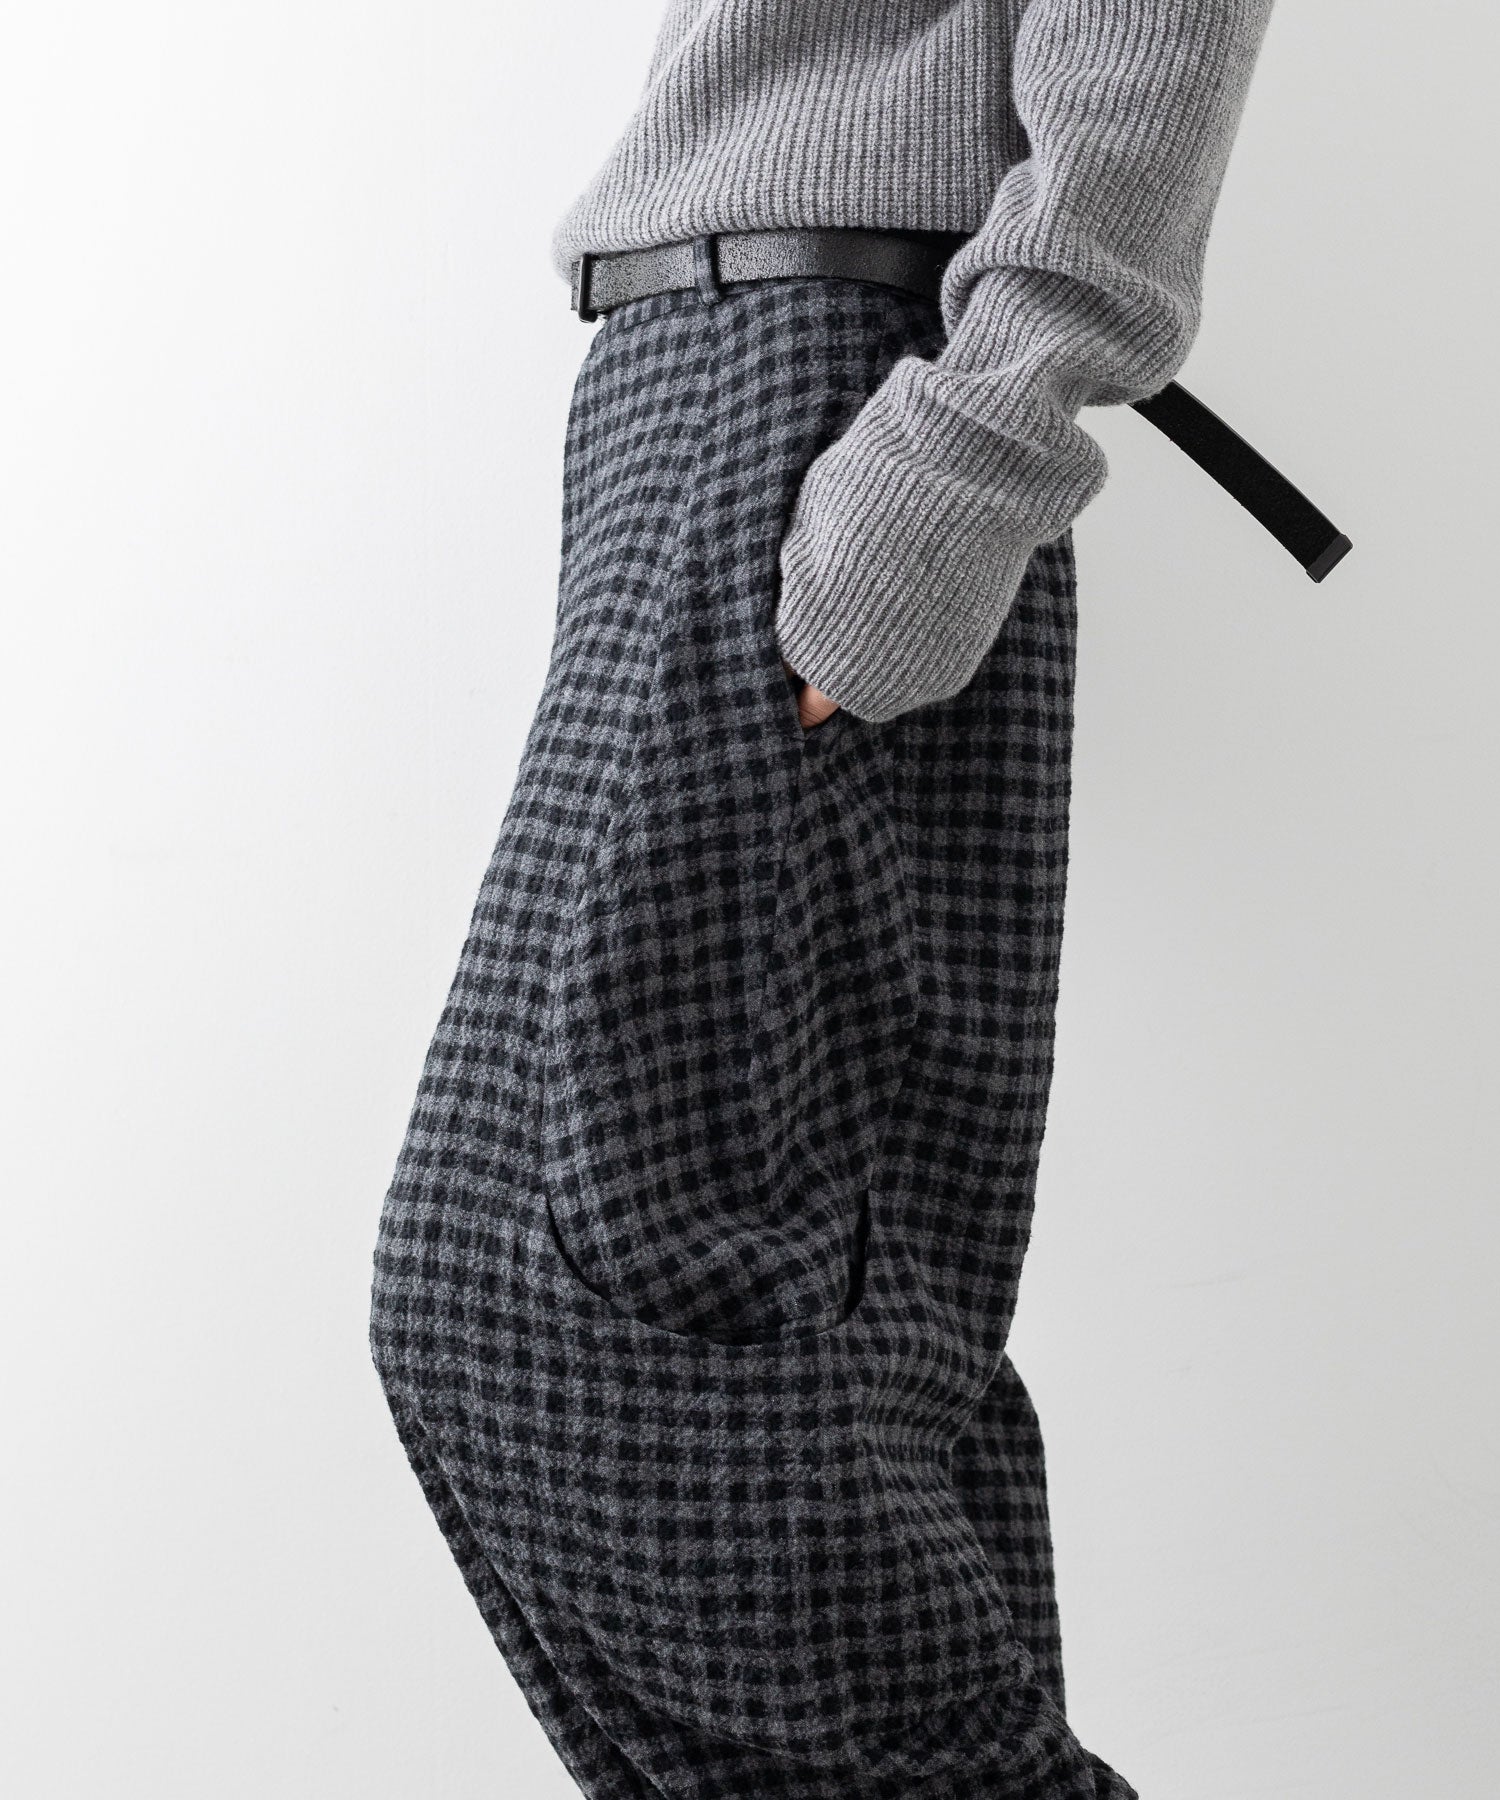 sage NATION セイジネーション 23AW MALAY TROUSER - CHECKERBOARD GINGHAM sessionセッション福岡セレクトショップ 公式通販サイト 